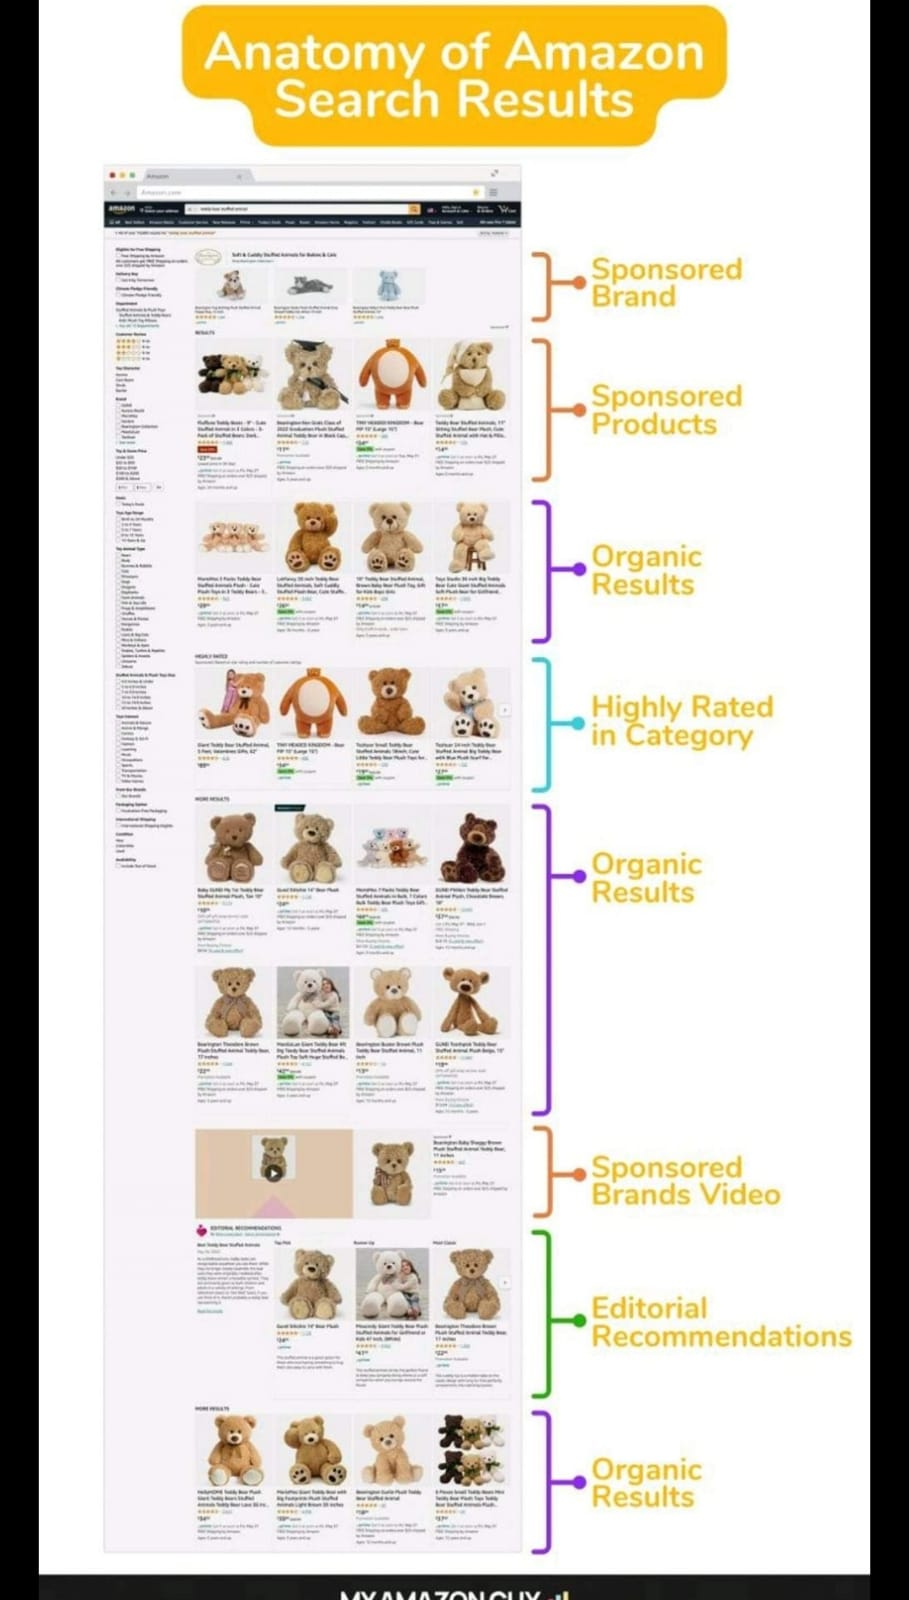 Anatomy of Amazon Search Results